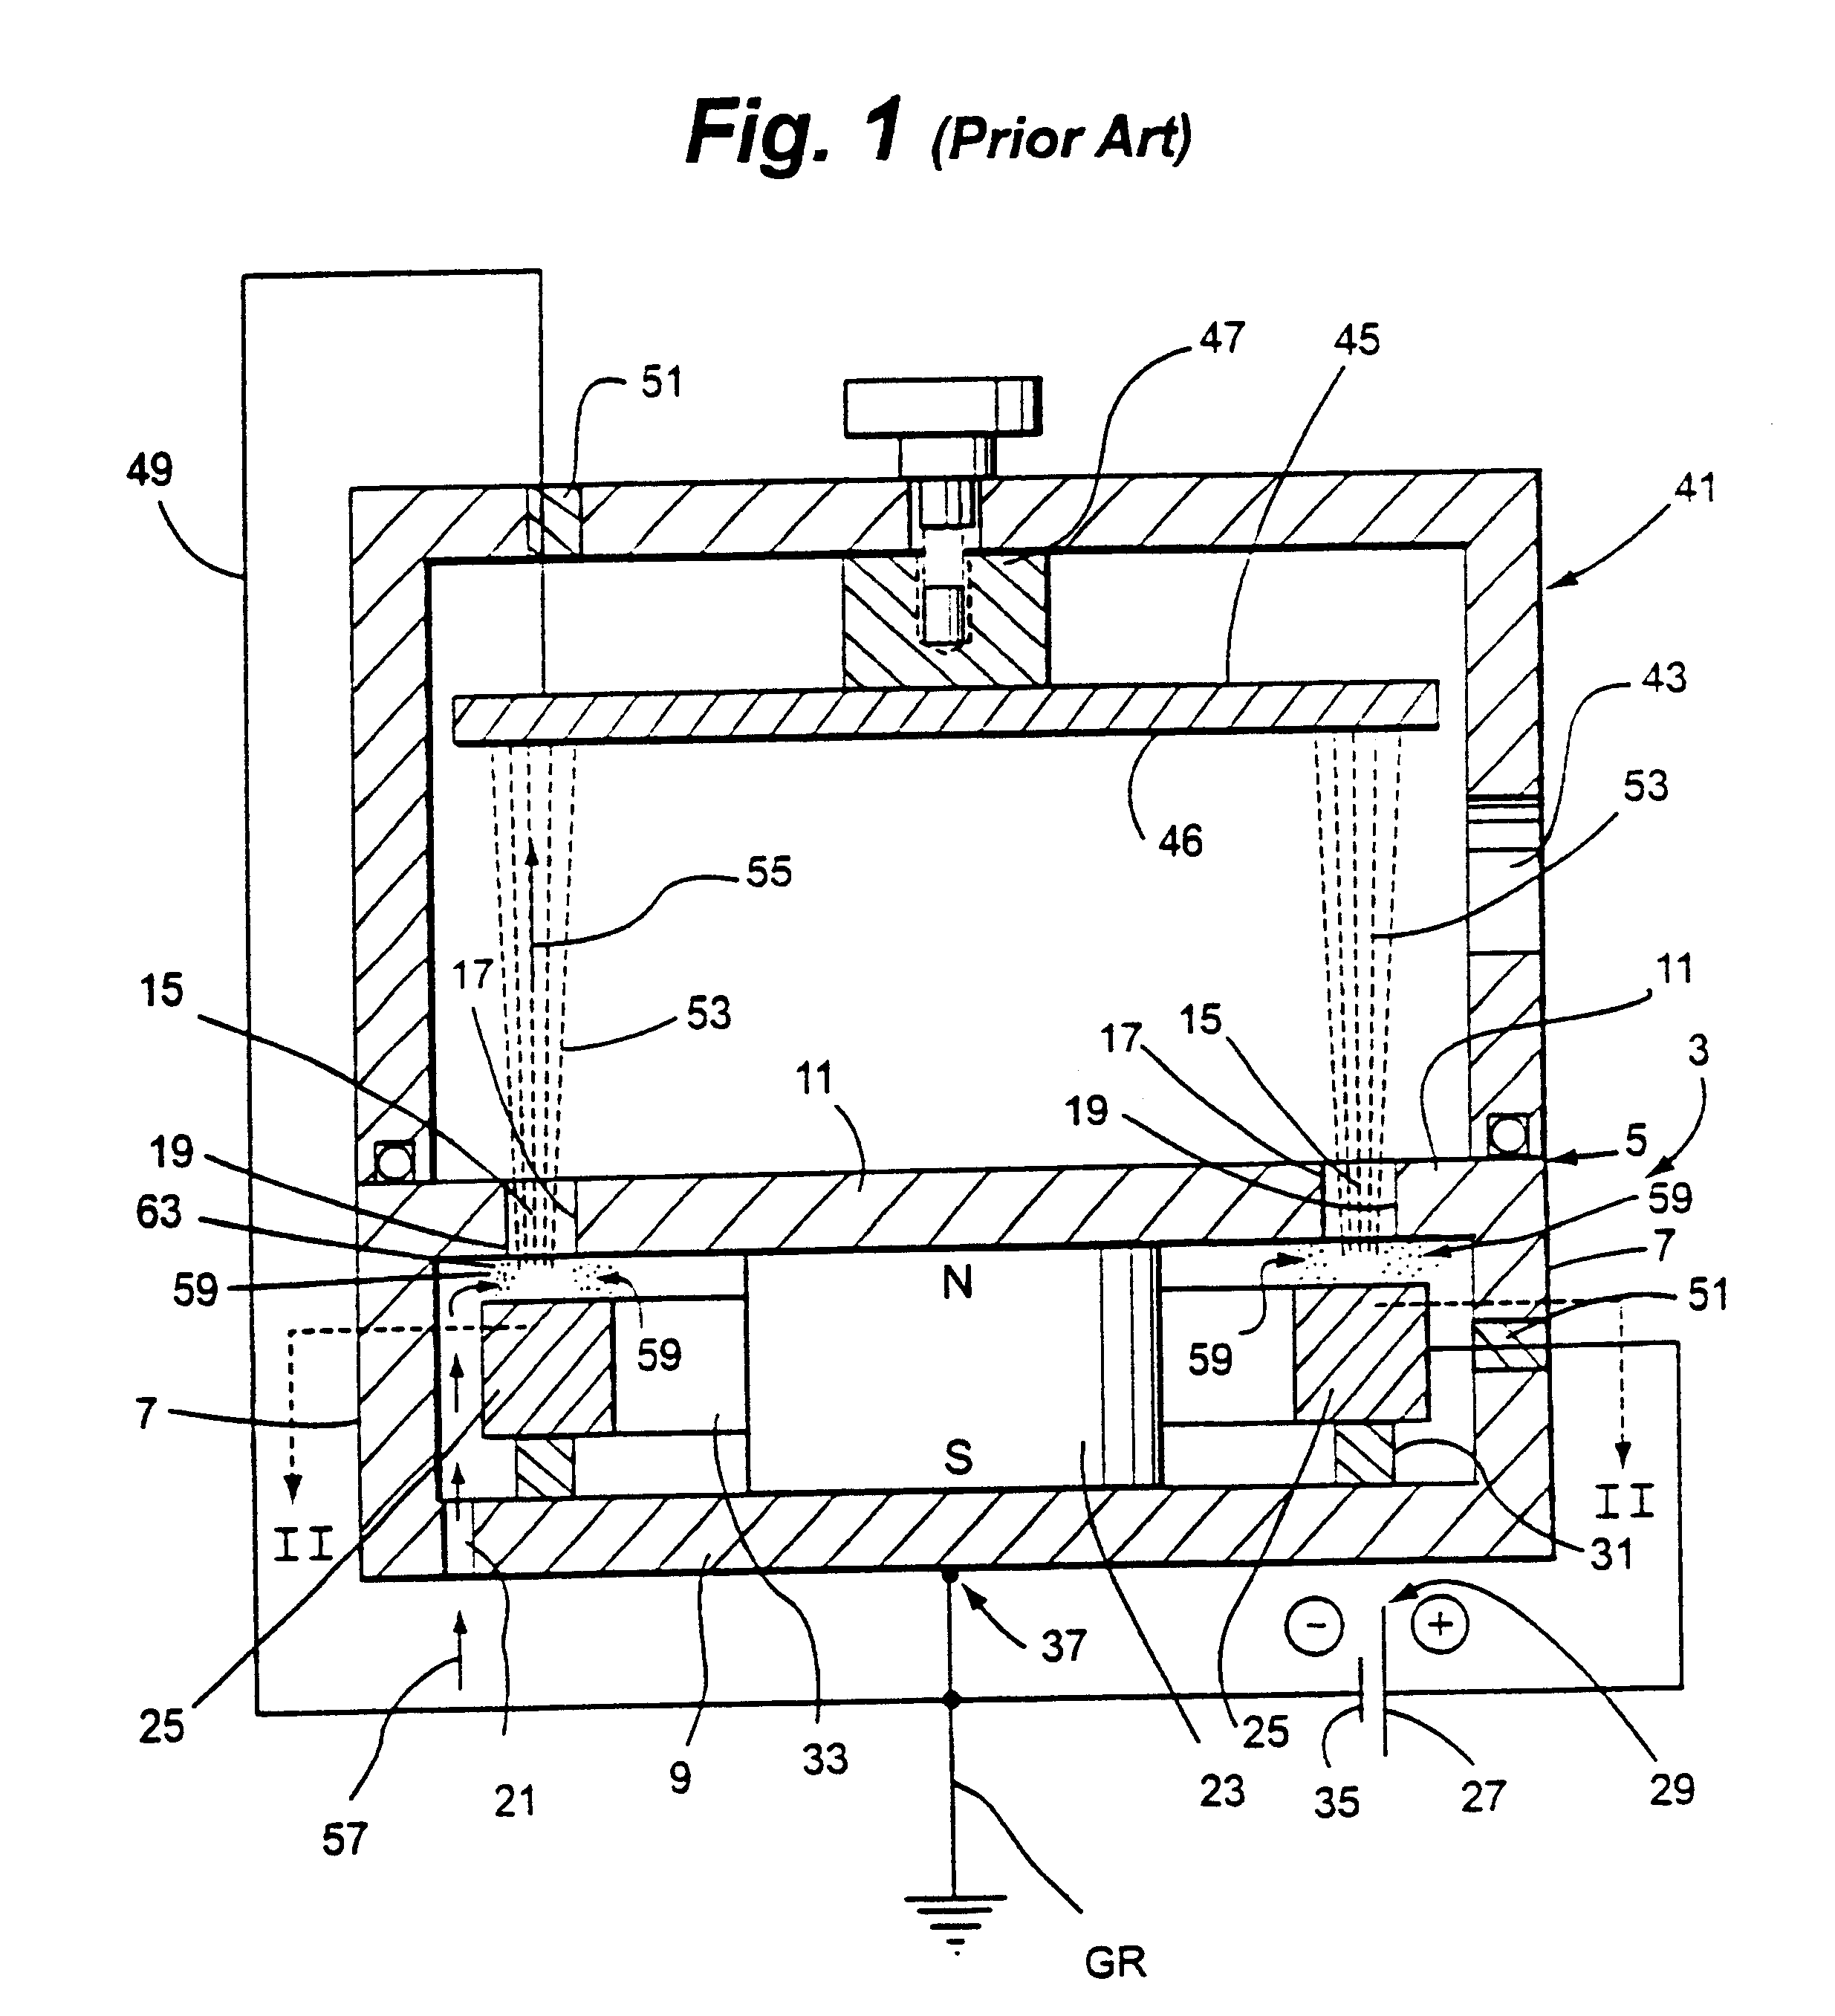 Cold cathode ion beam deposition apparatus with segregated gas flow